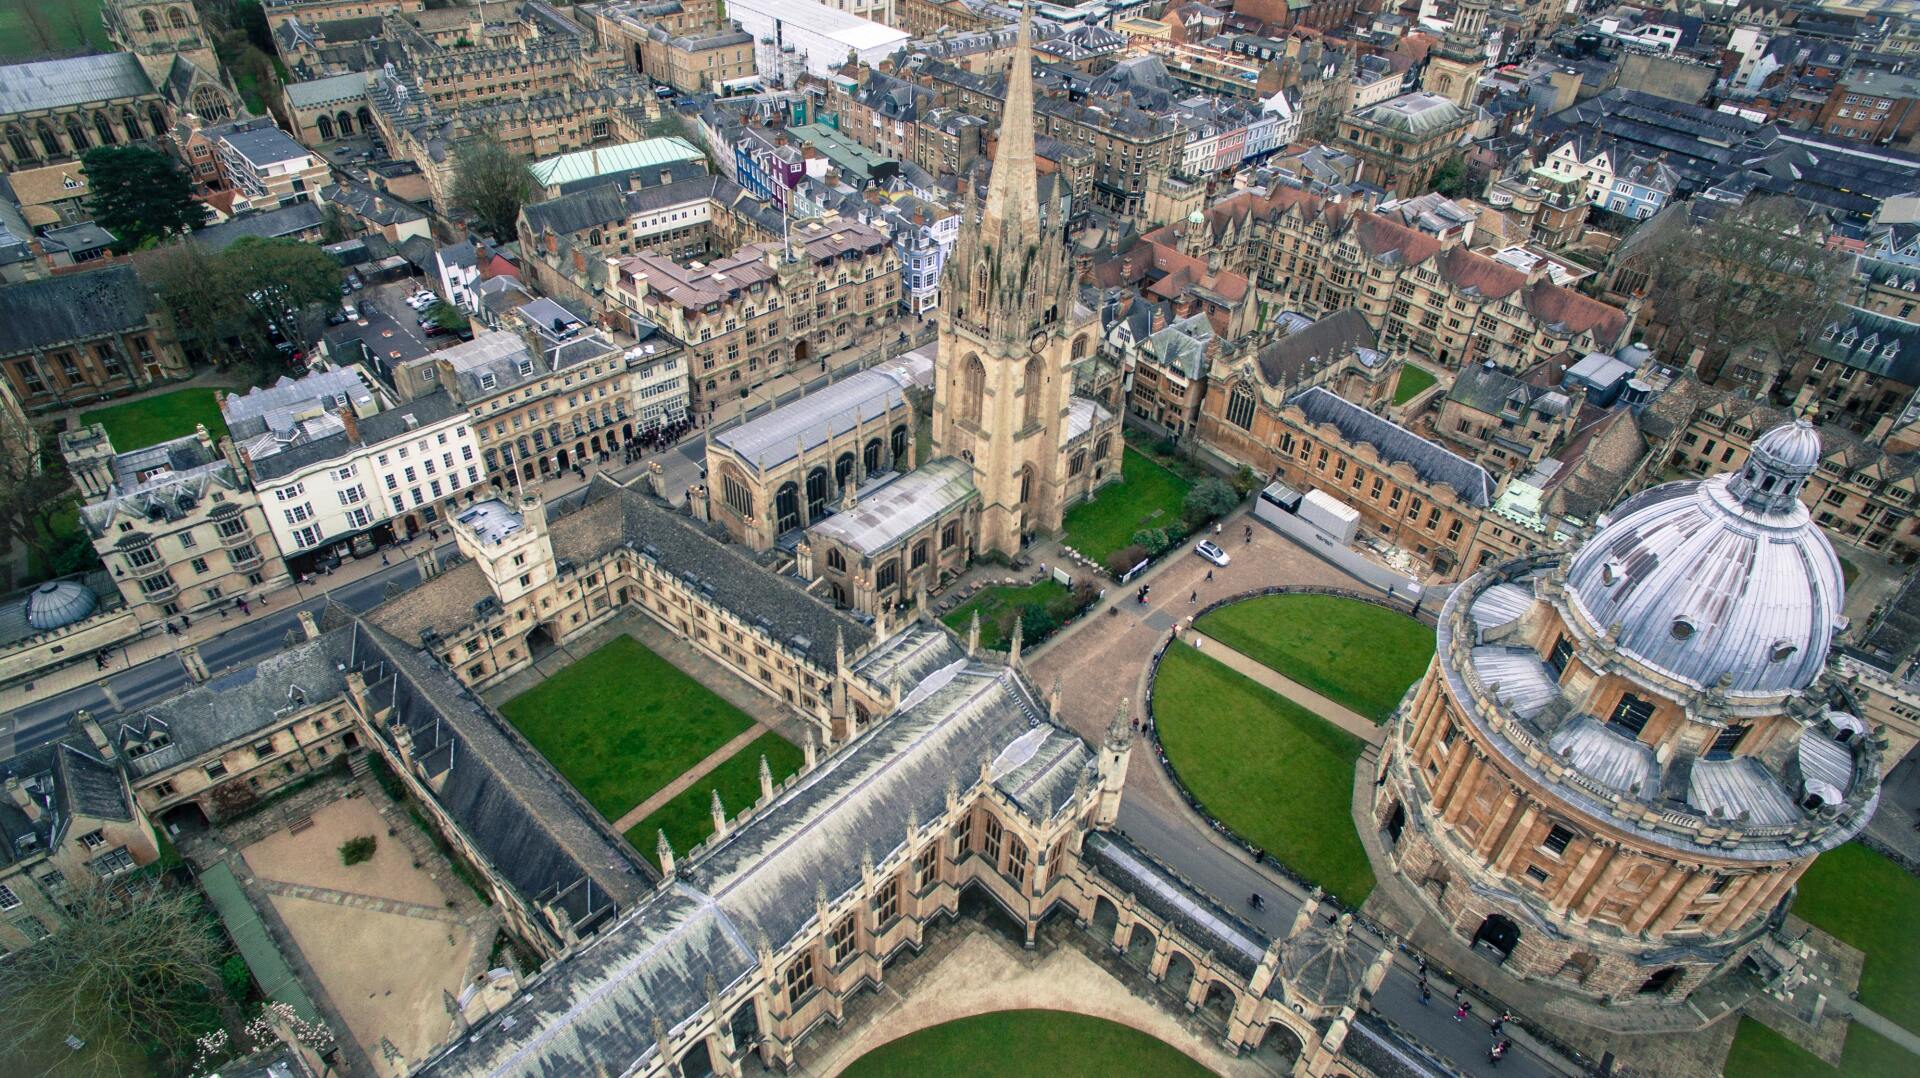 View of Oxford from above